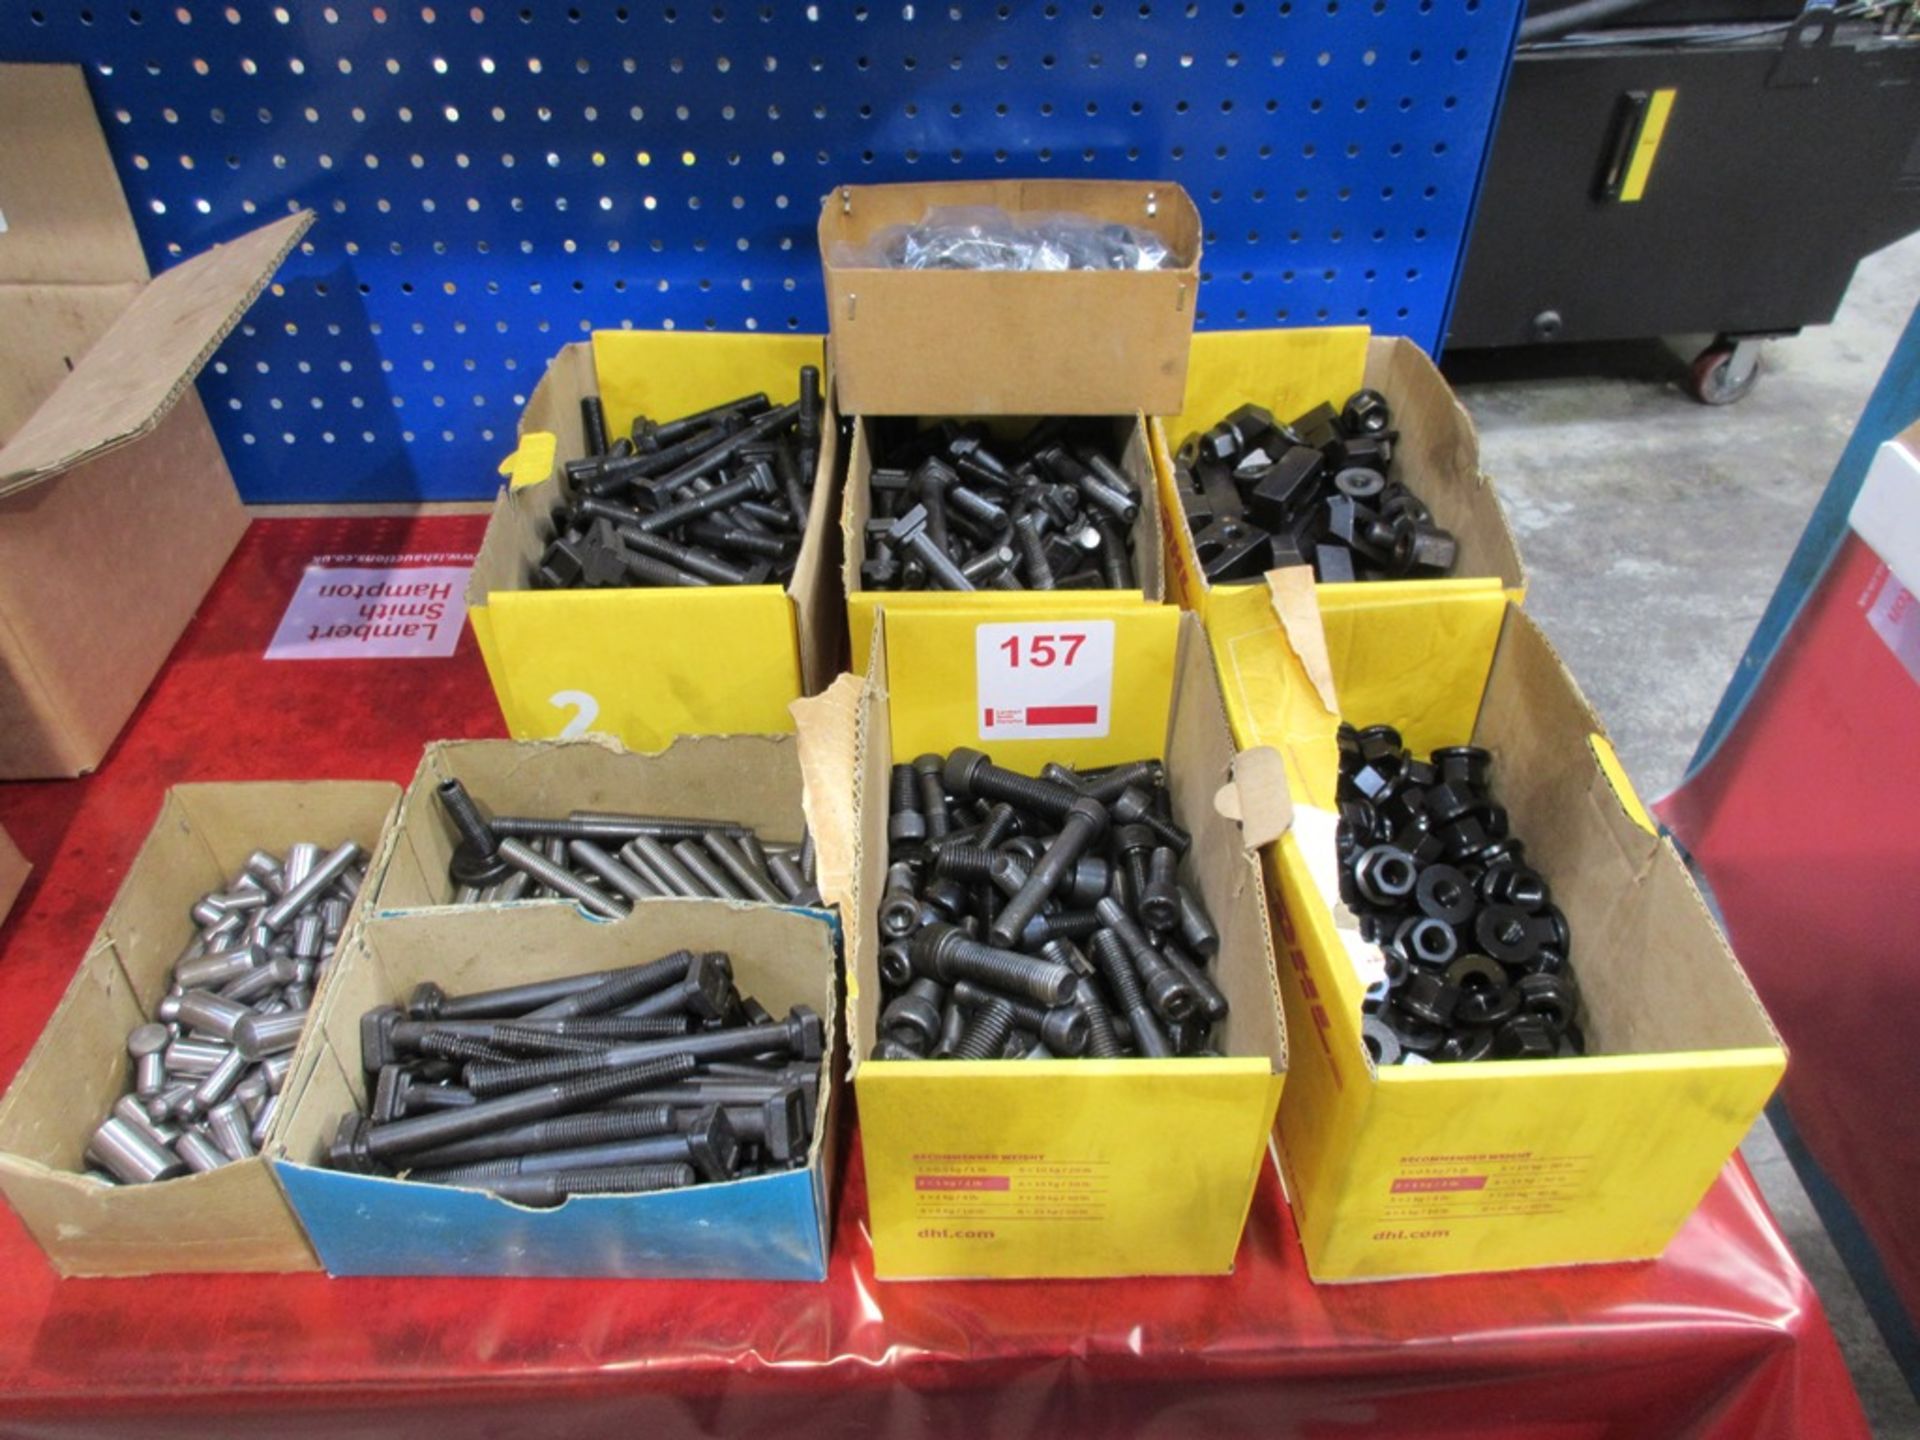 Seven boxes of assorted nuts, bolts & clamps